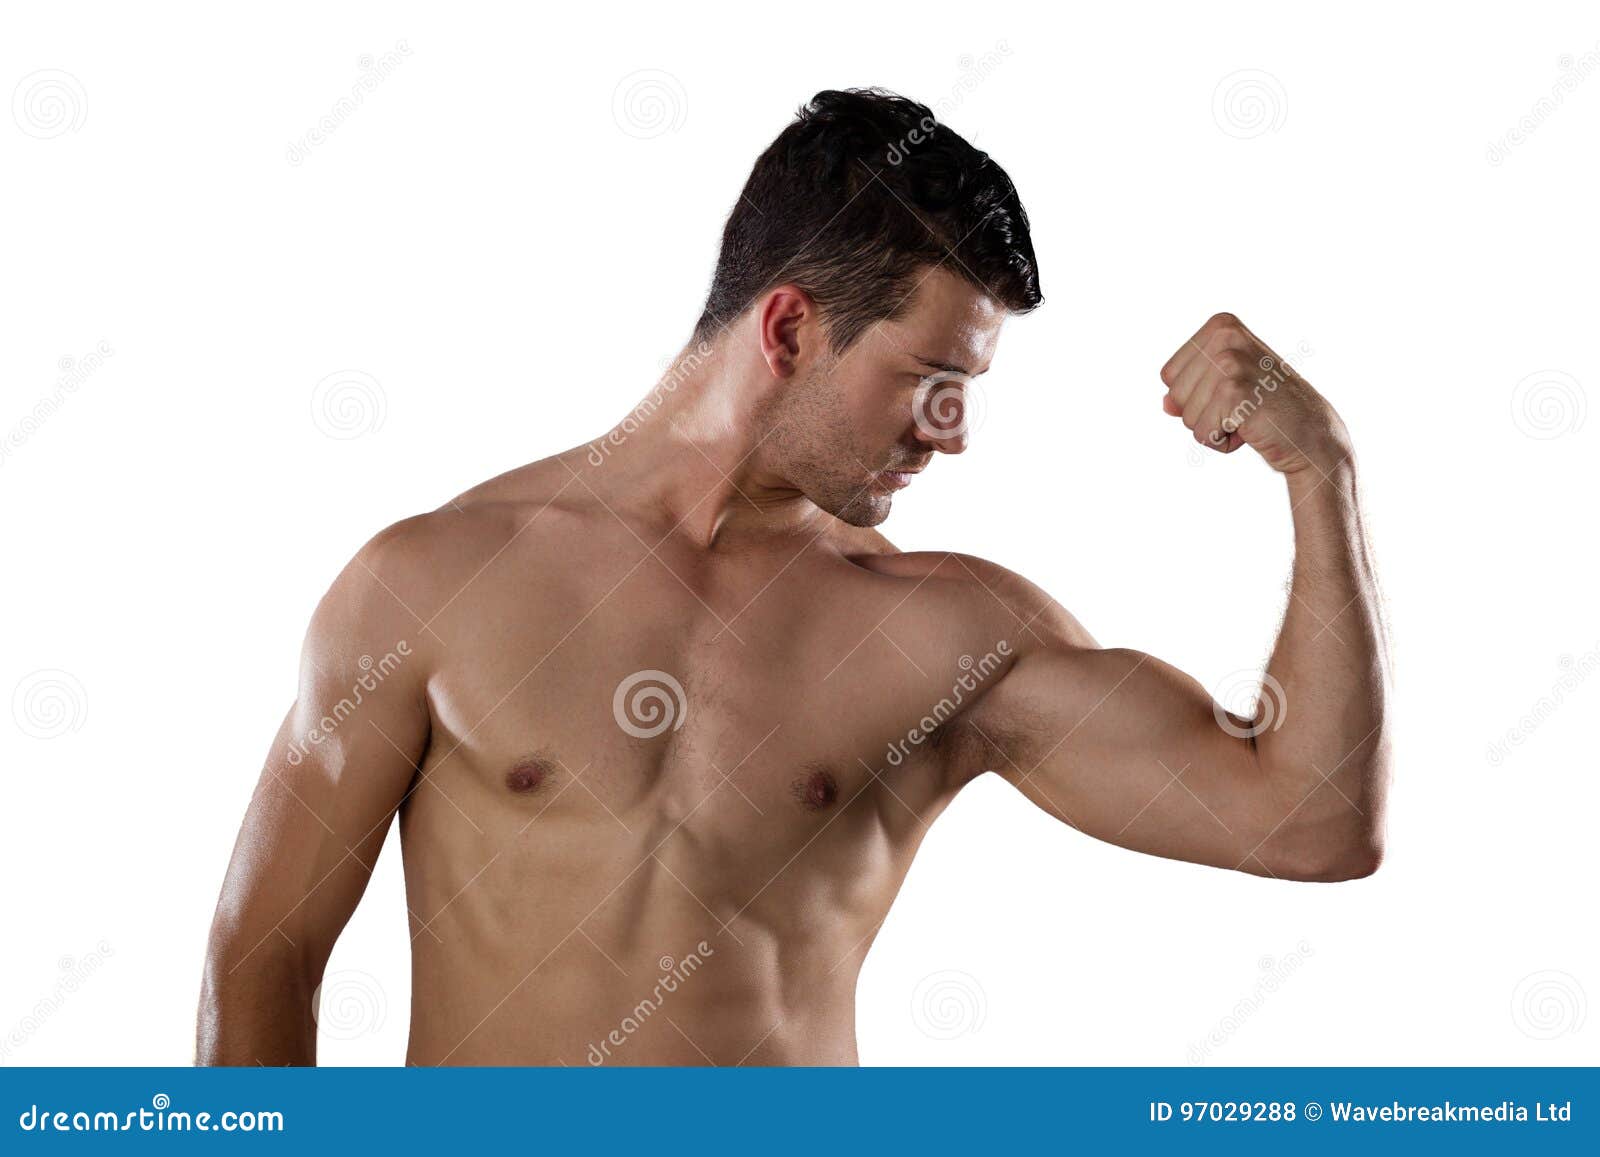 Shirtless Man Showing His Muscles In Slow Motion On White 